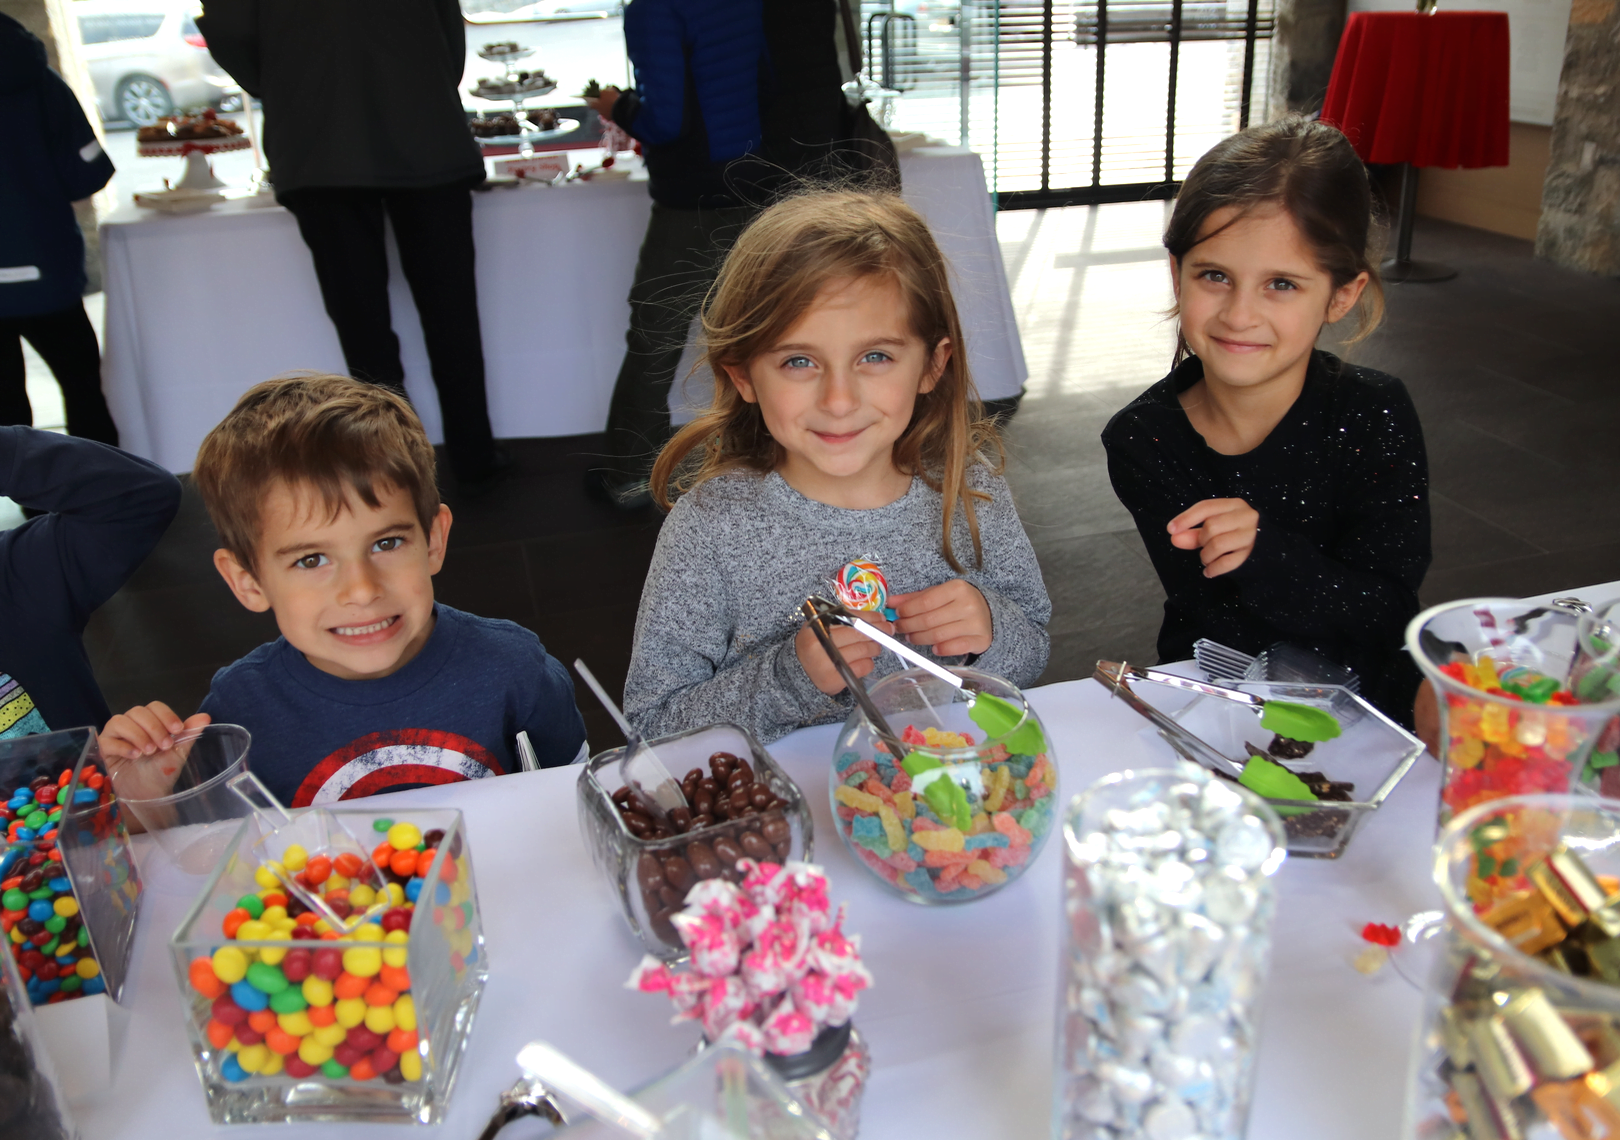 Checking out the candy bar at the Greenwich Historical Society's "Chocolate Sunday" event. Feb 16, 2020 Photo: Leslie Yager